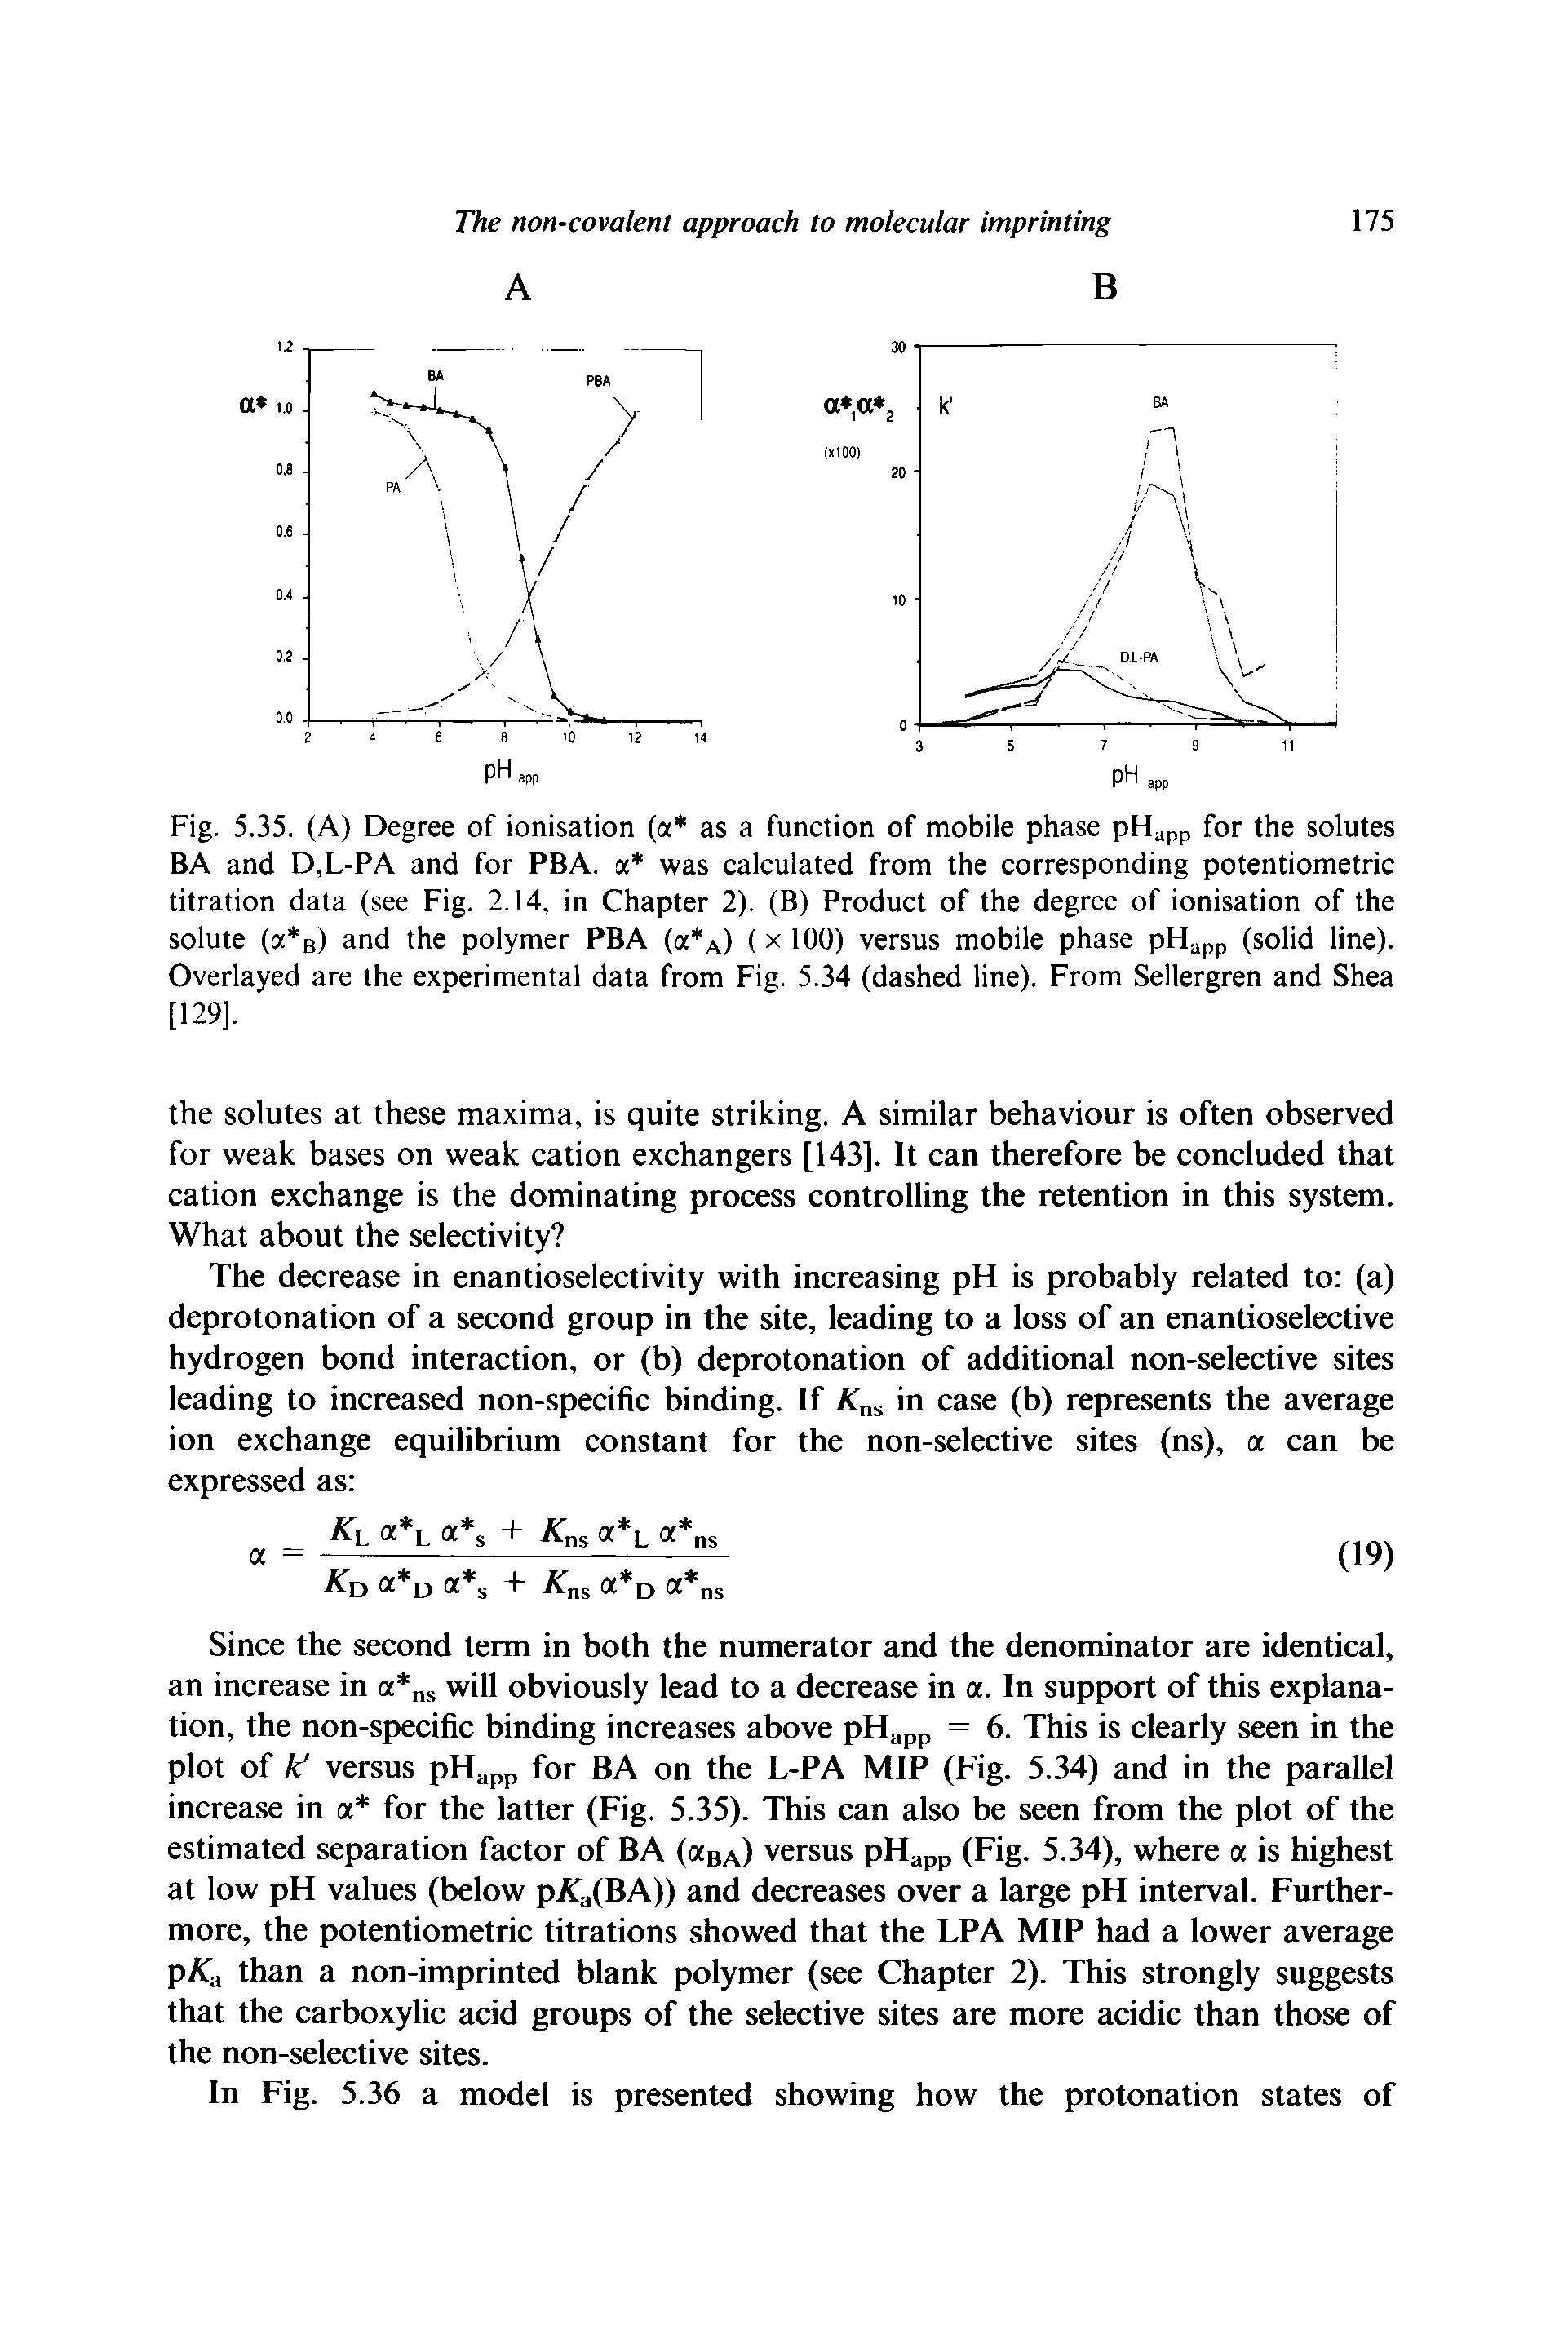 Fig. 5.35. (A) Degree of ionisation (a as a function of mobile phase pHapp for the solutes BA and D,L-PA and for PBA. a was calculated from the corresponding potentiometric titration data (see Fig. 2.14, in Chapter 2). (B) Product of the degree of ionisation of the solute (a B) and the polymer PBA (b a) (x 100) versus mobile phase pHapp (solid line). Overlayed are the experimental data from Fig. 5.34 (dashed line). From Sellergren and Shea [129].